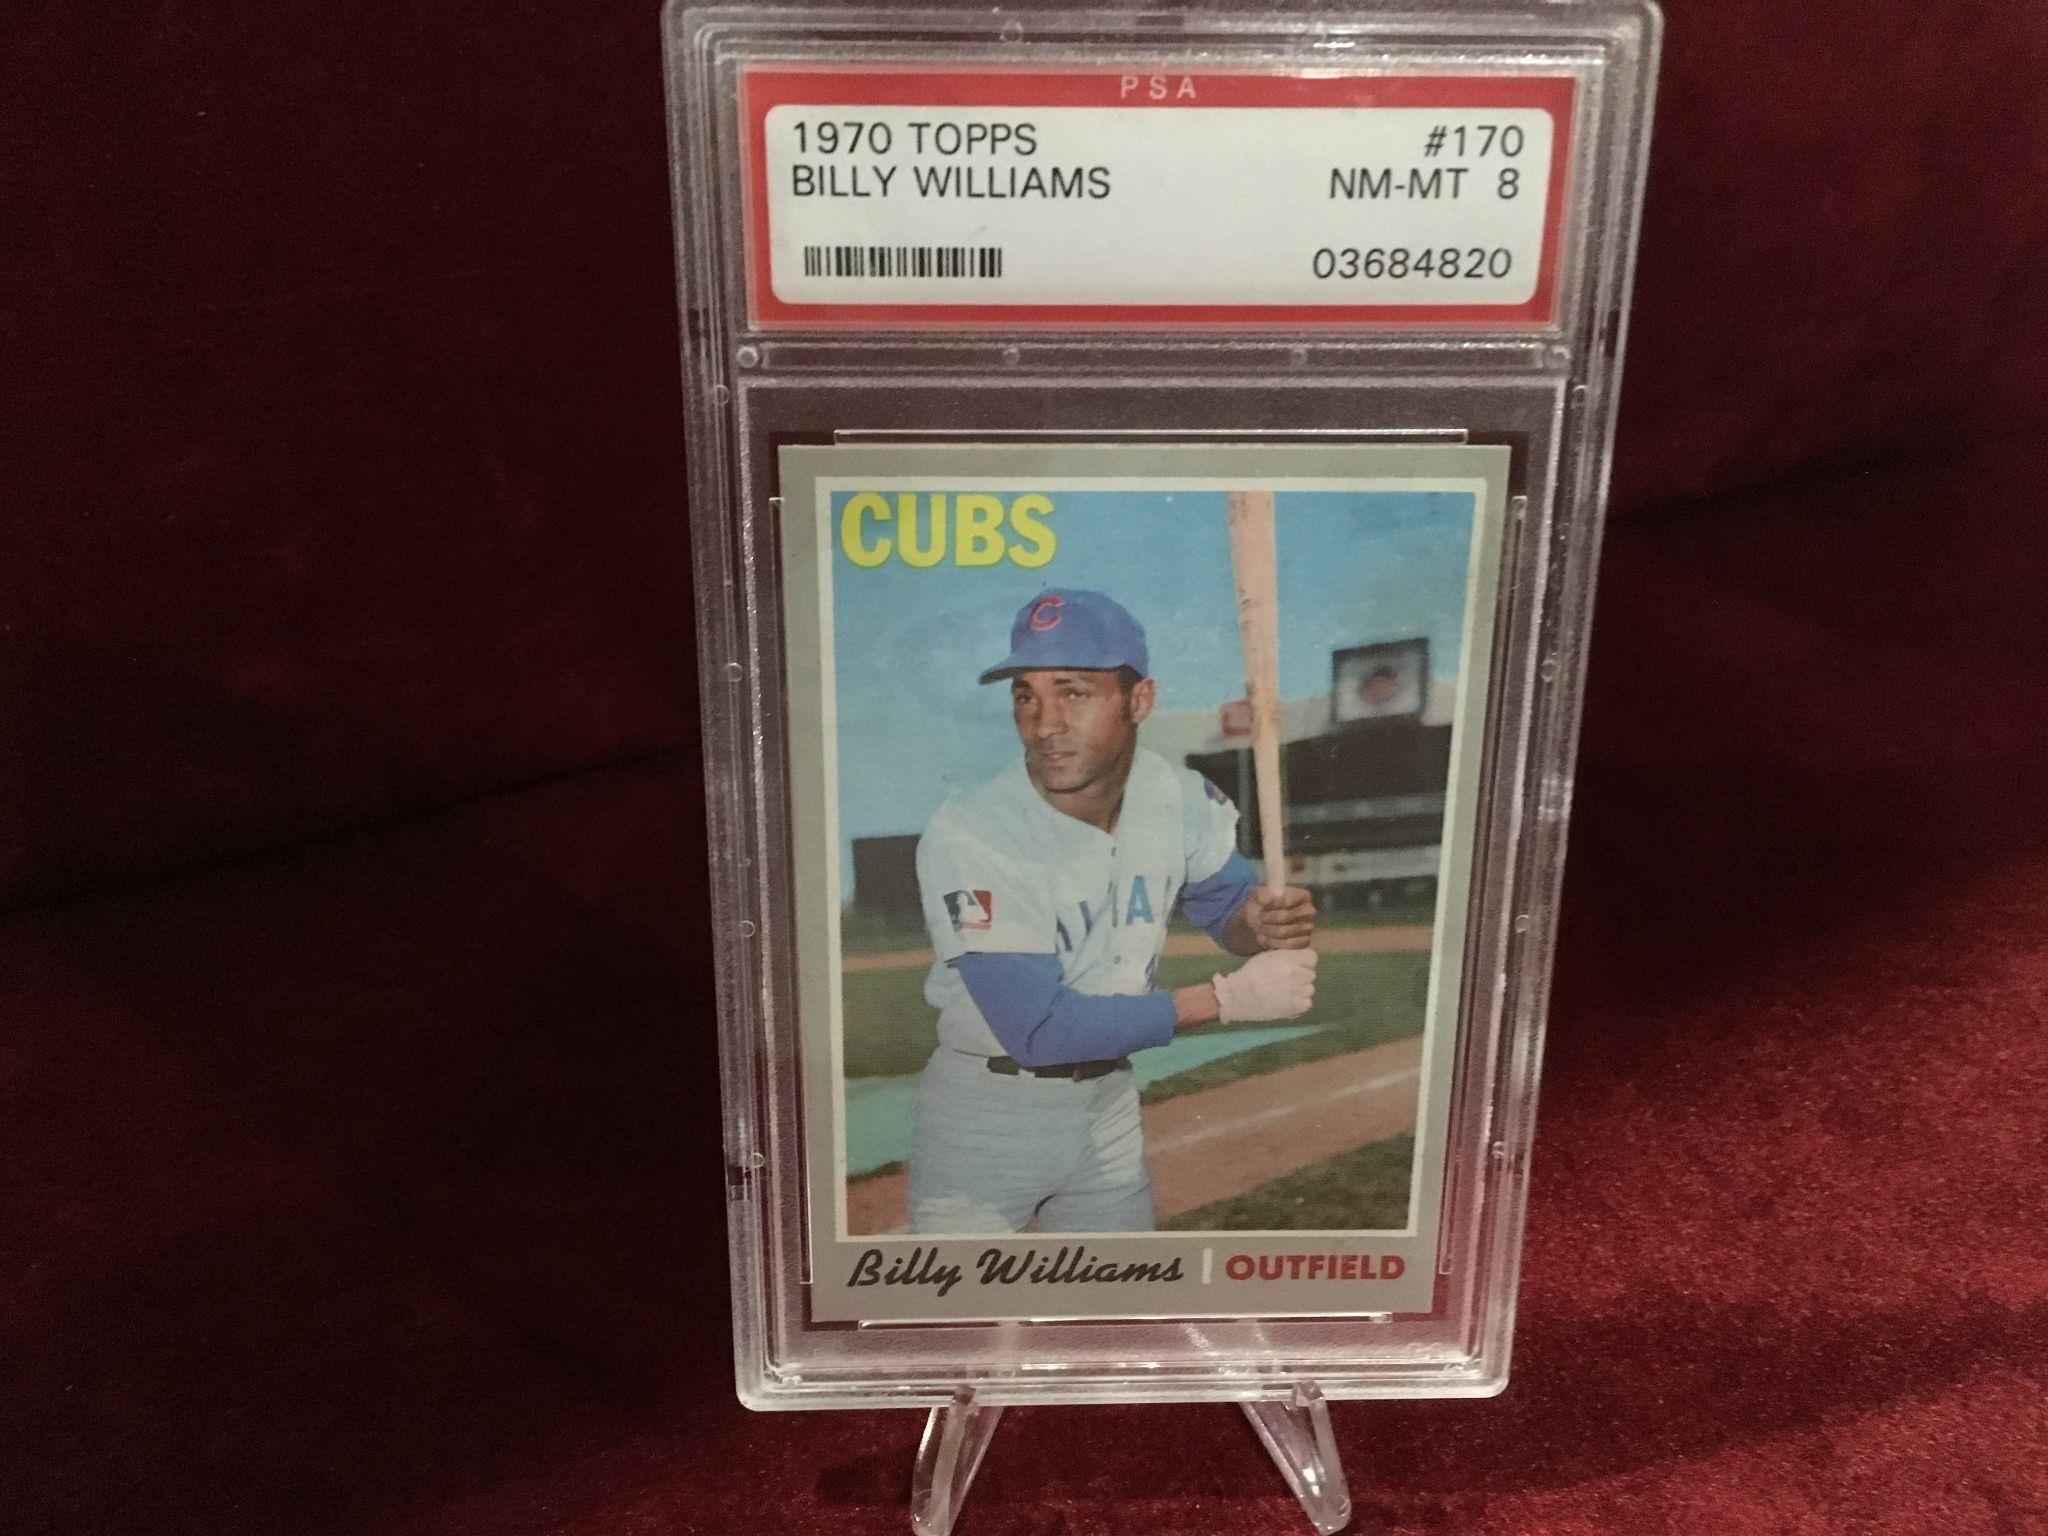 KINGS KOLLECTABLES AUCTIONS #12